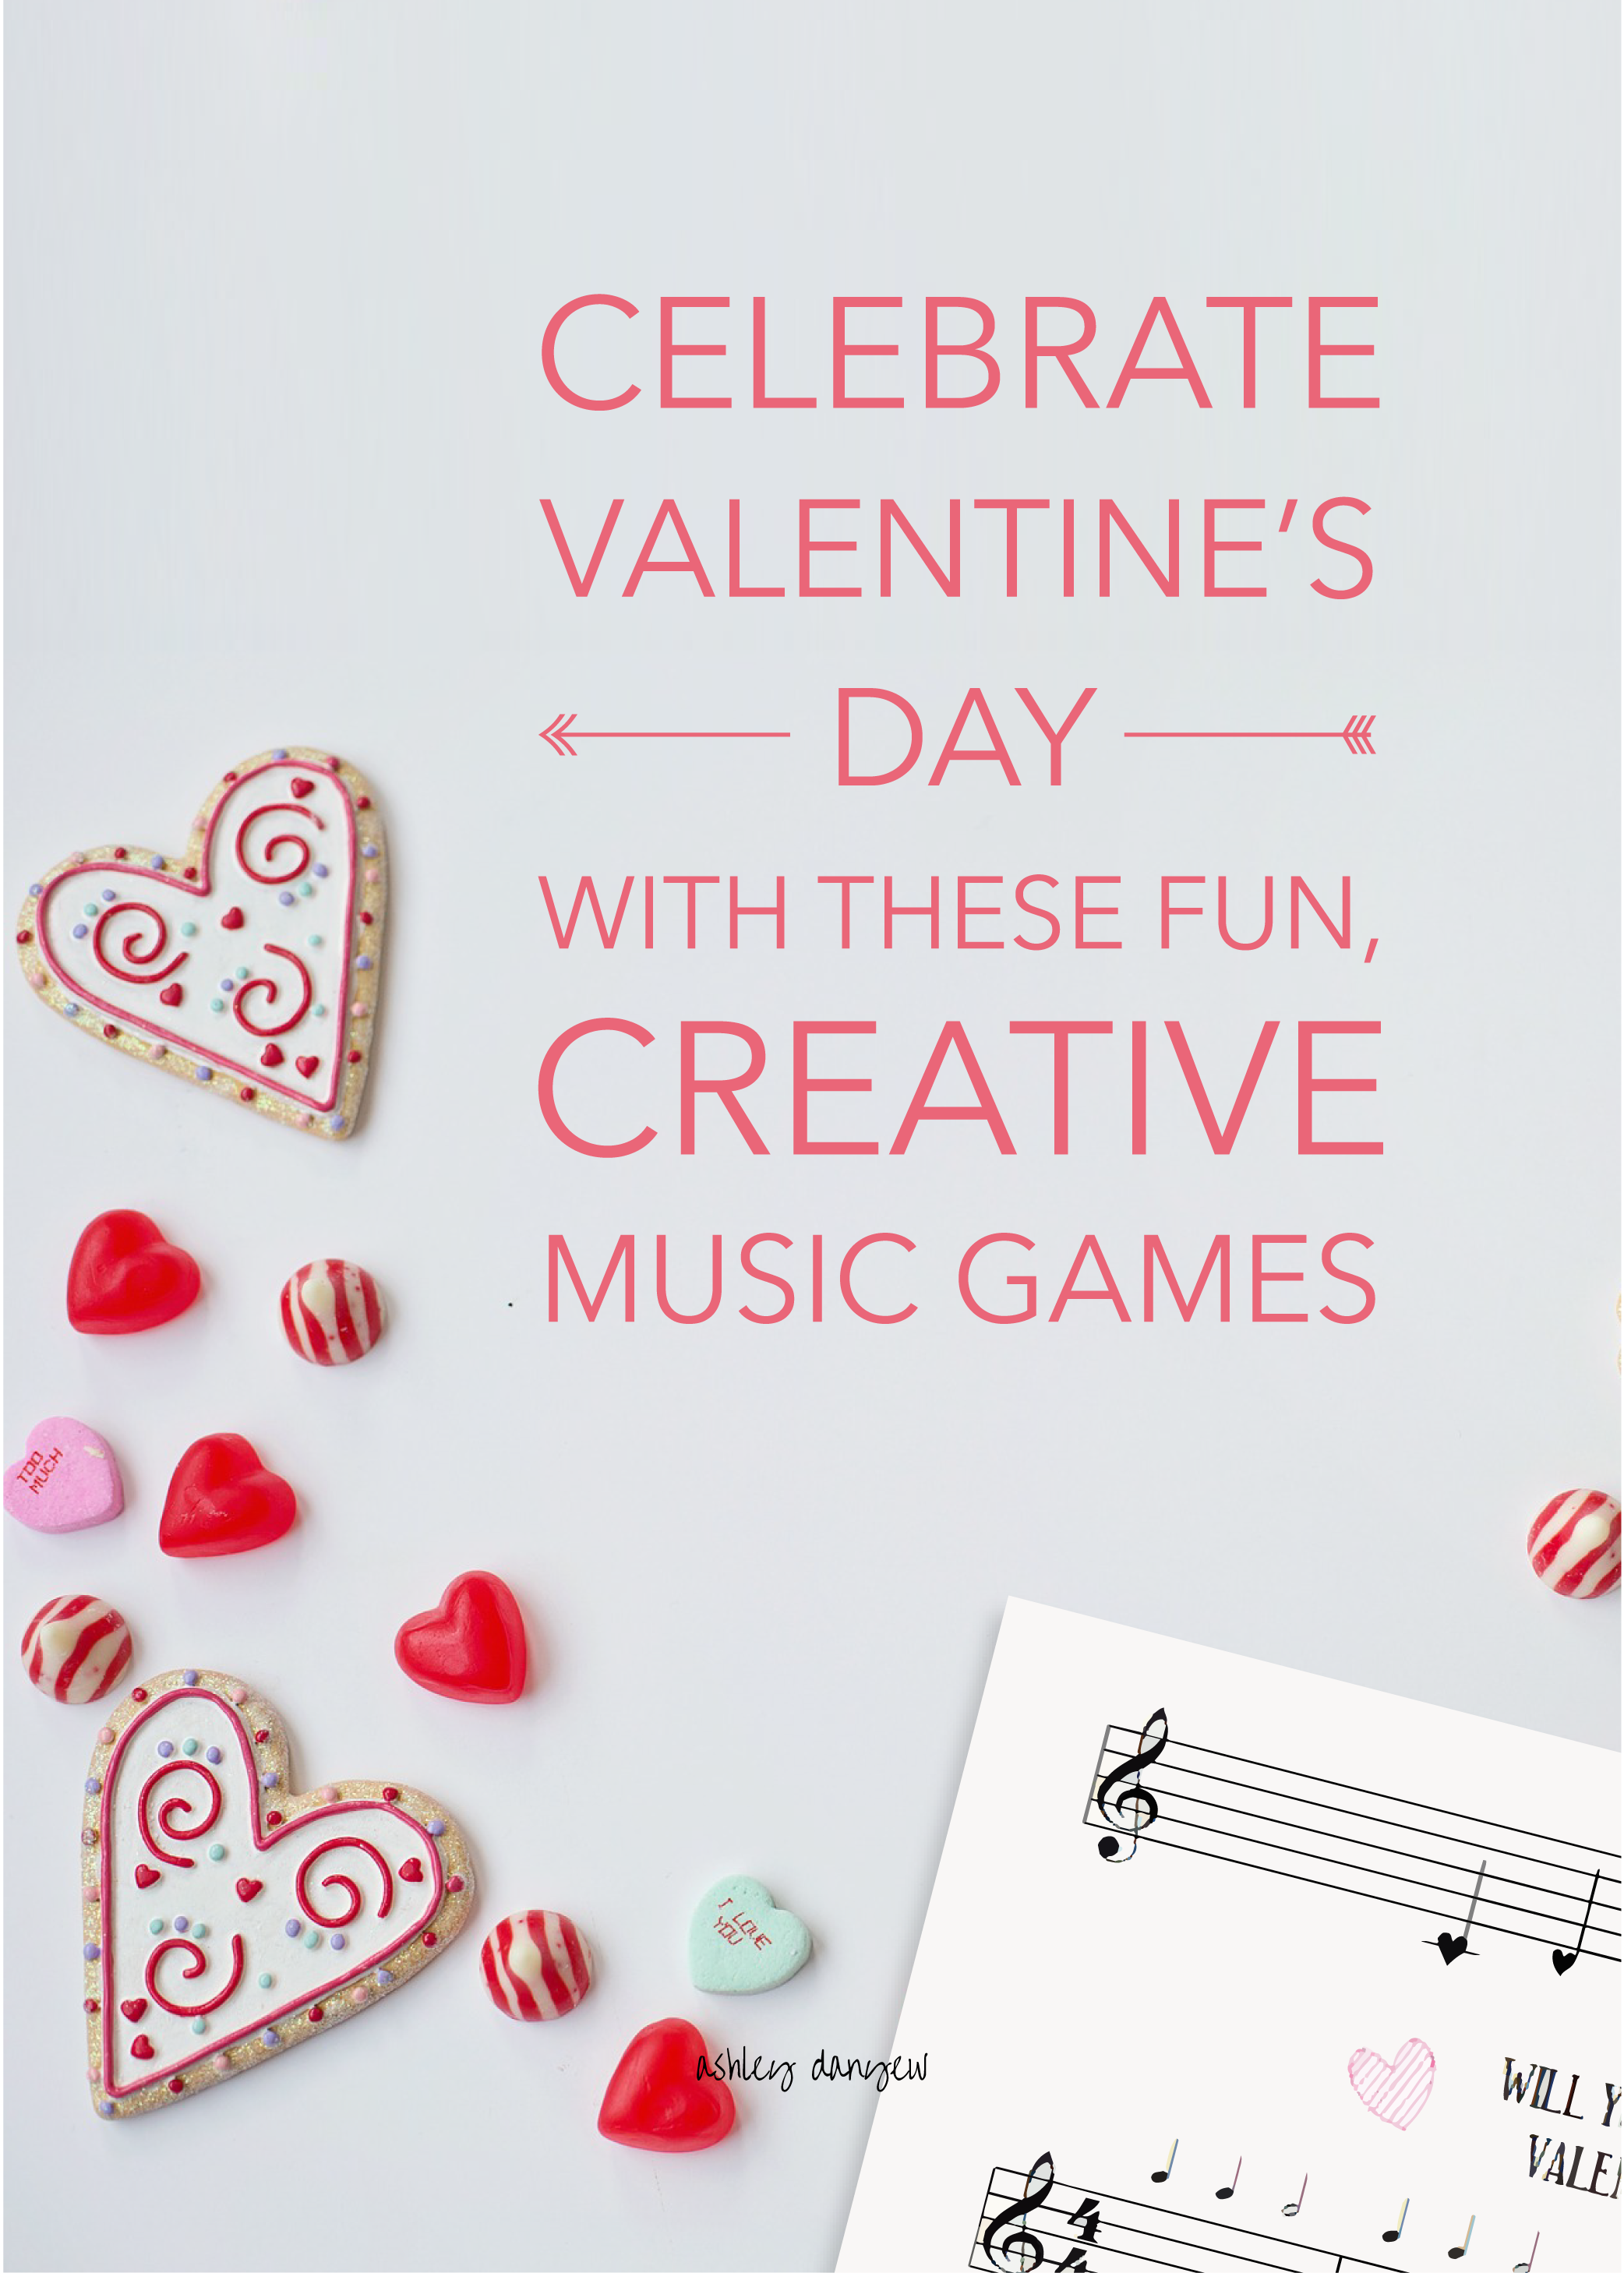 Celebrate Valentine's Day with These Fun, Creative Music Games